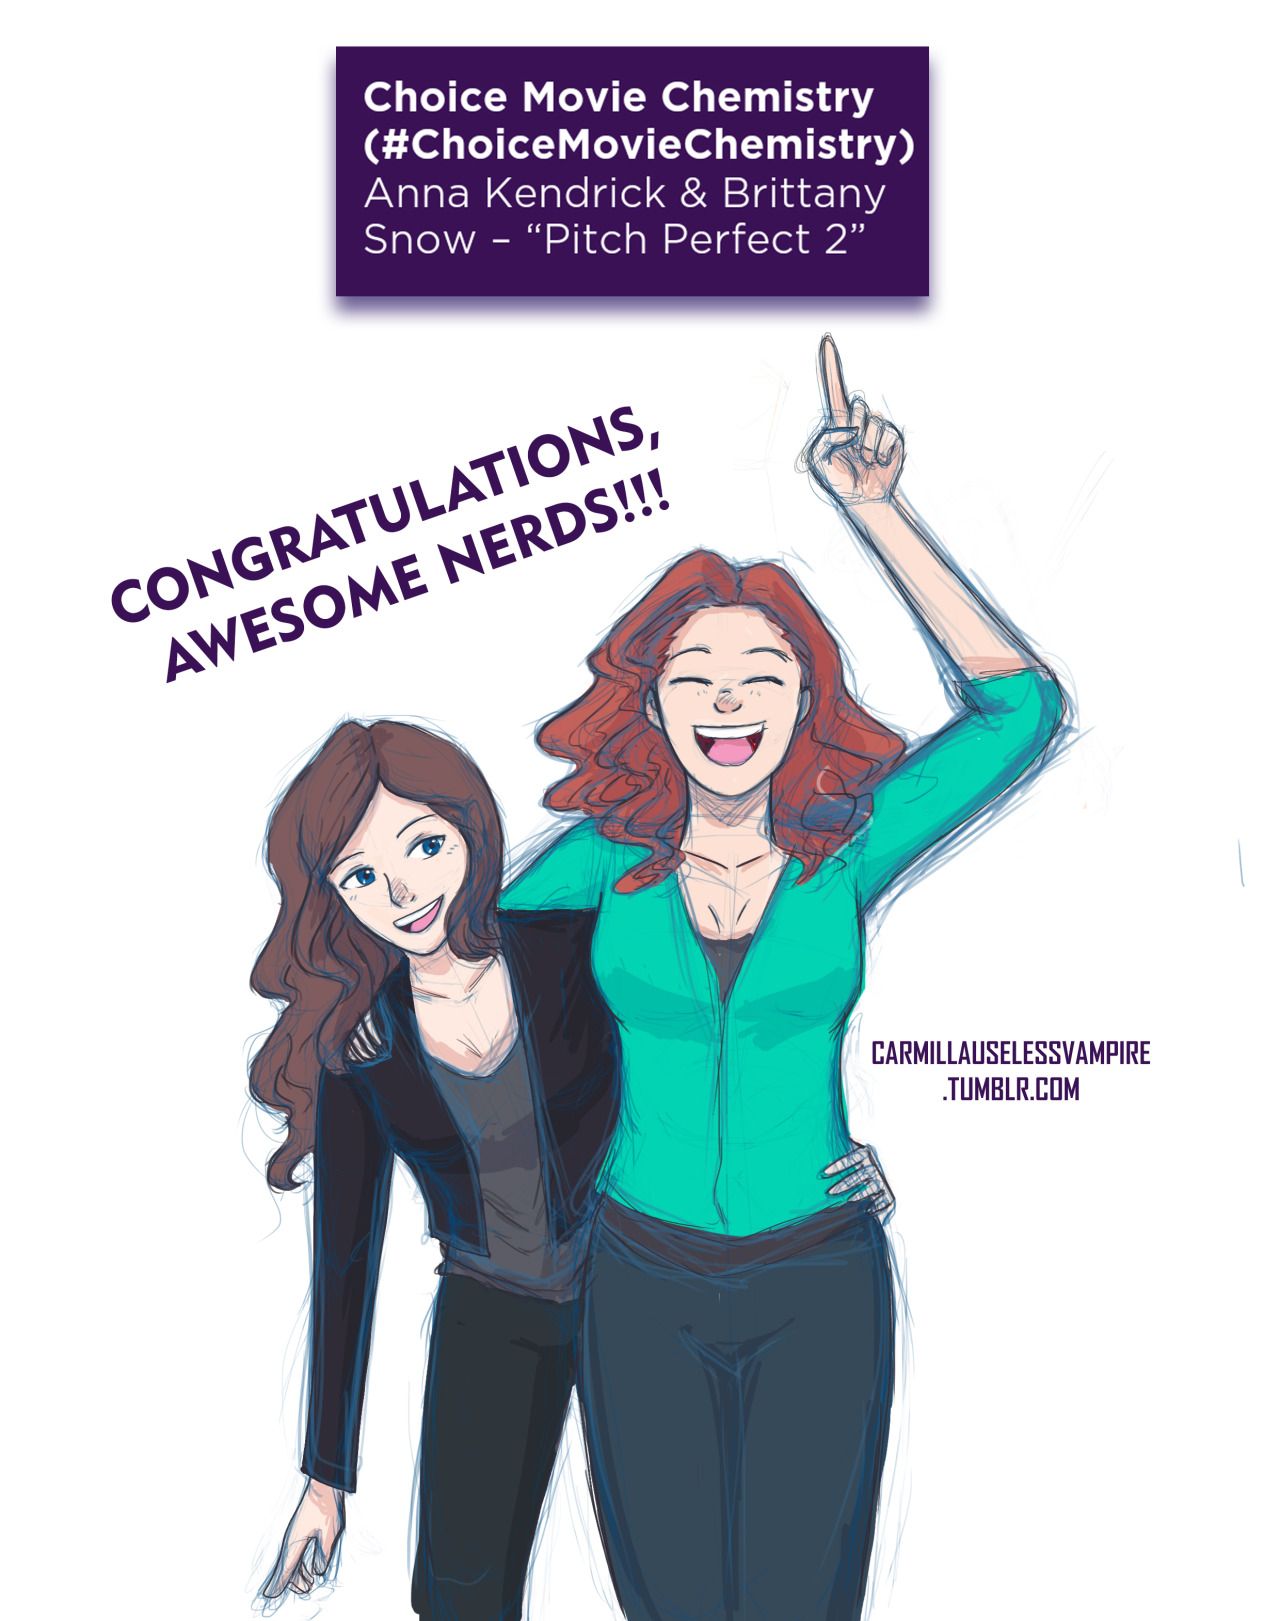 carmillauselessvampire:
“ Teen Choice Awards 2015: #ChoiceMovieChemistry Bechloe from Pitch Perfect 2
CONGRATULATIONS TO ANNA KENDRICK AND BRITTANY SNOW!!
AND TO YOU, AWESOME NERDS!!! WE DID IT!!
excuse this quick drawing
”